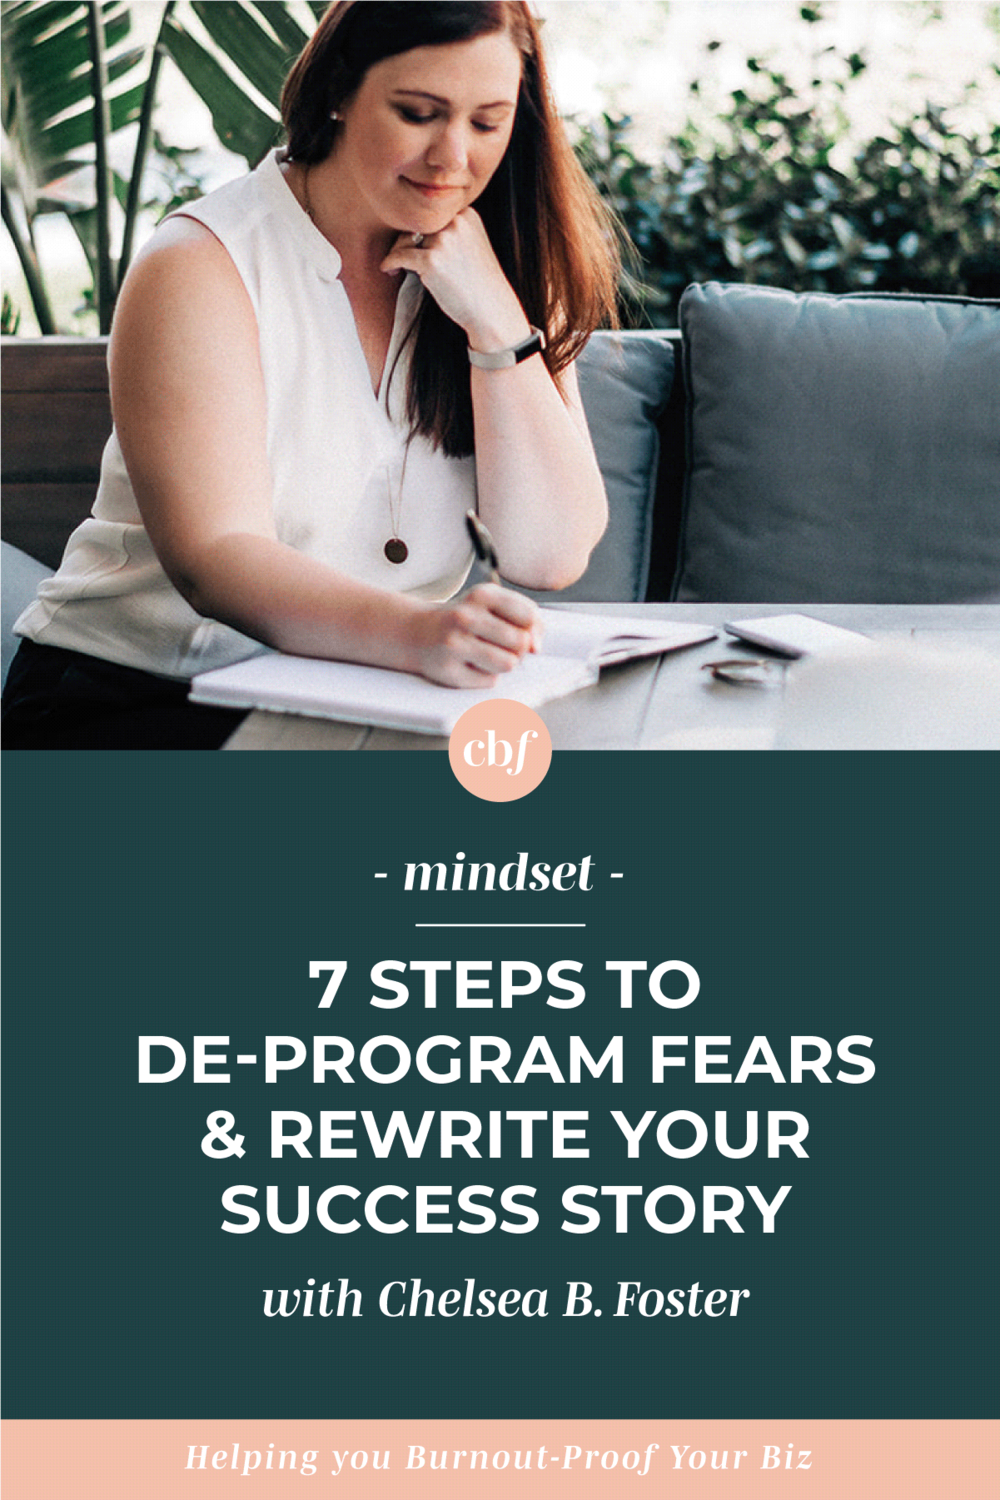 Burnout-Proof Your Biz with Chelsea B Foster | 7 Steps to De-Program Your Fears &amp; Rewrite Your Success Story 